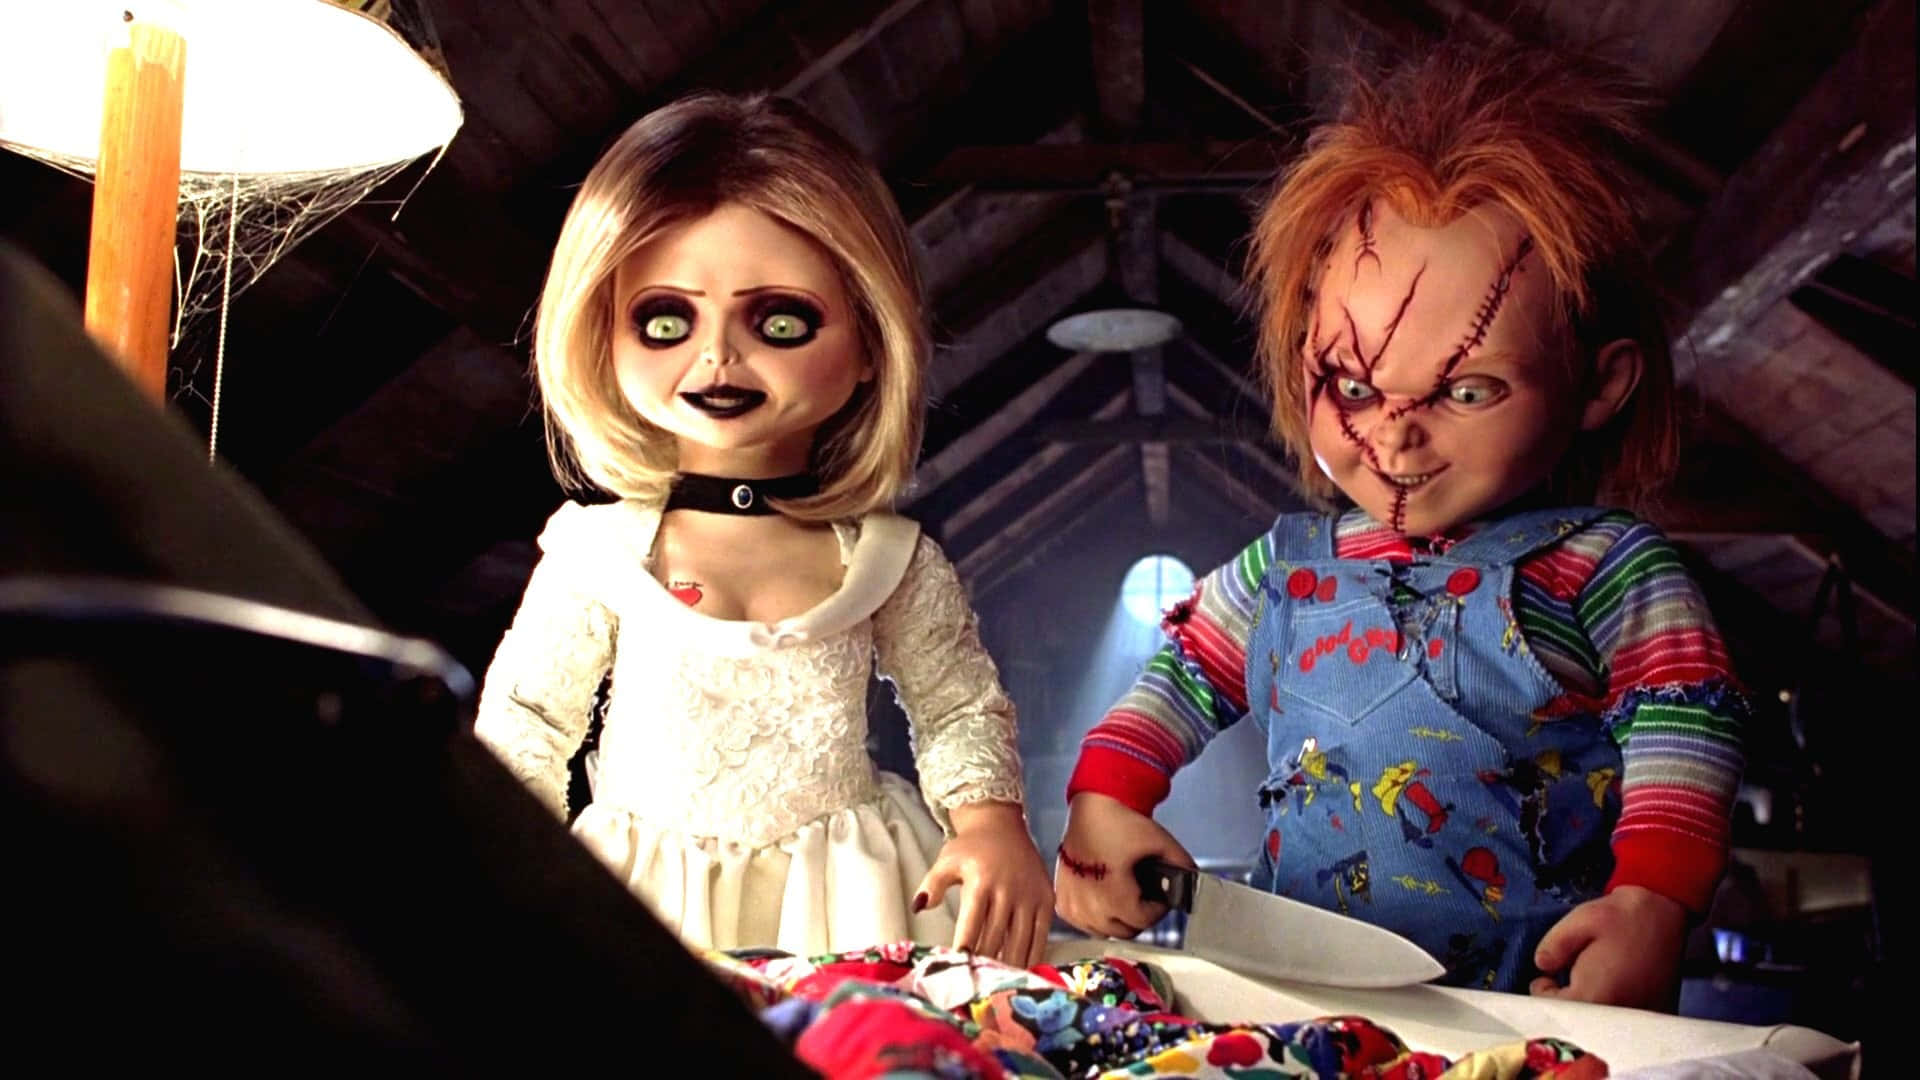 Two Dolls Dressed In Halloween Costumes Are Standing In A Room